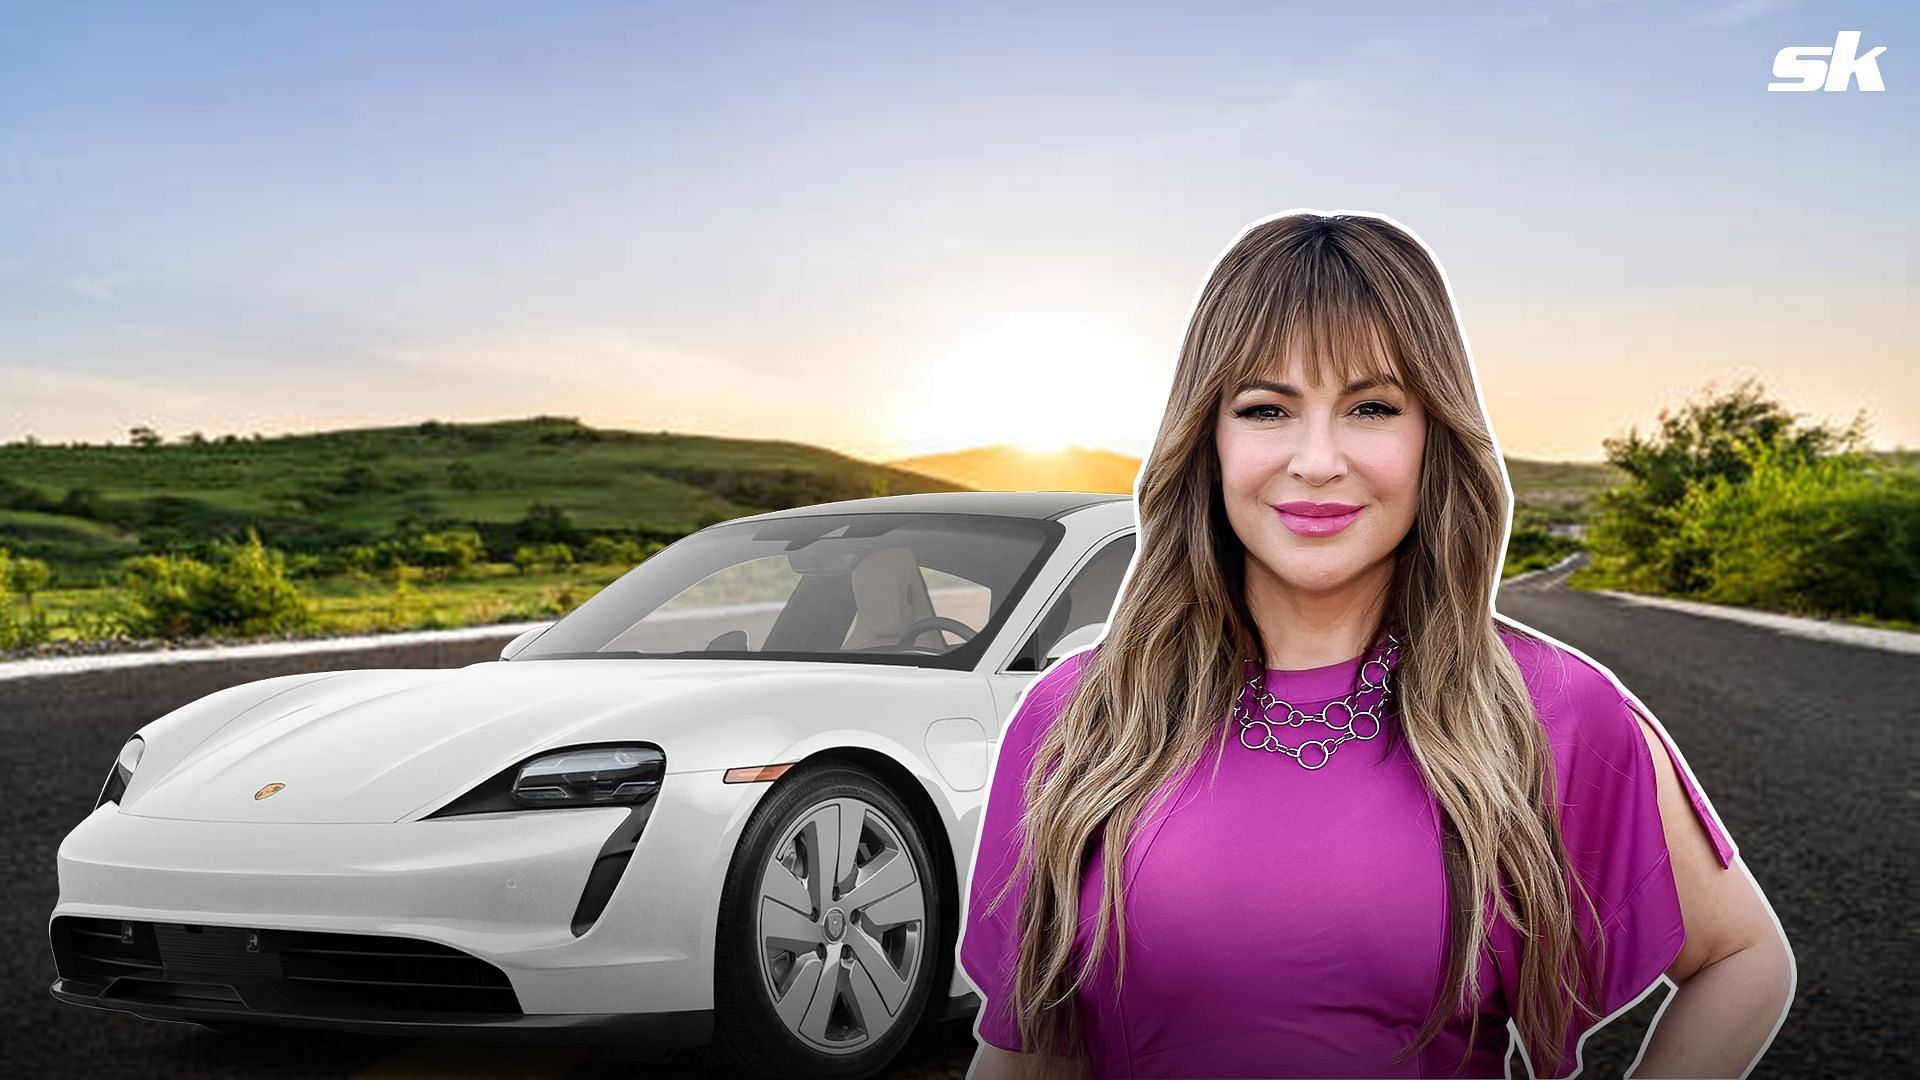 Actress Alyssa Milano spotted in $200,000 customized electric Porsche Taycan after facing backlash for son